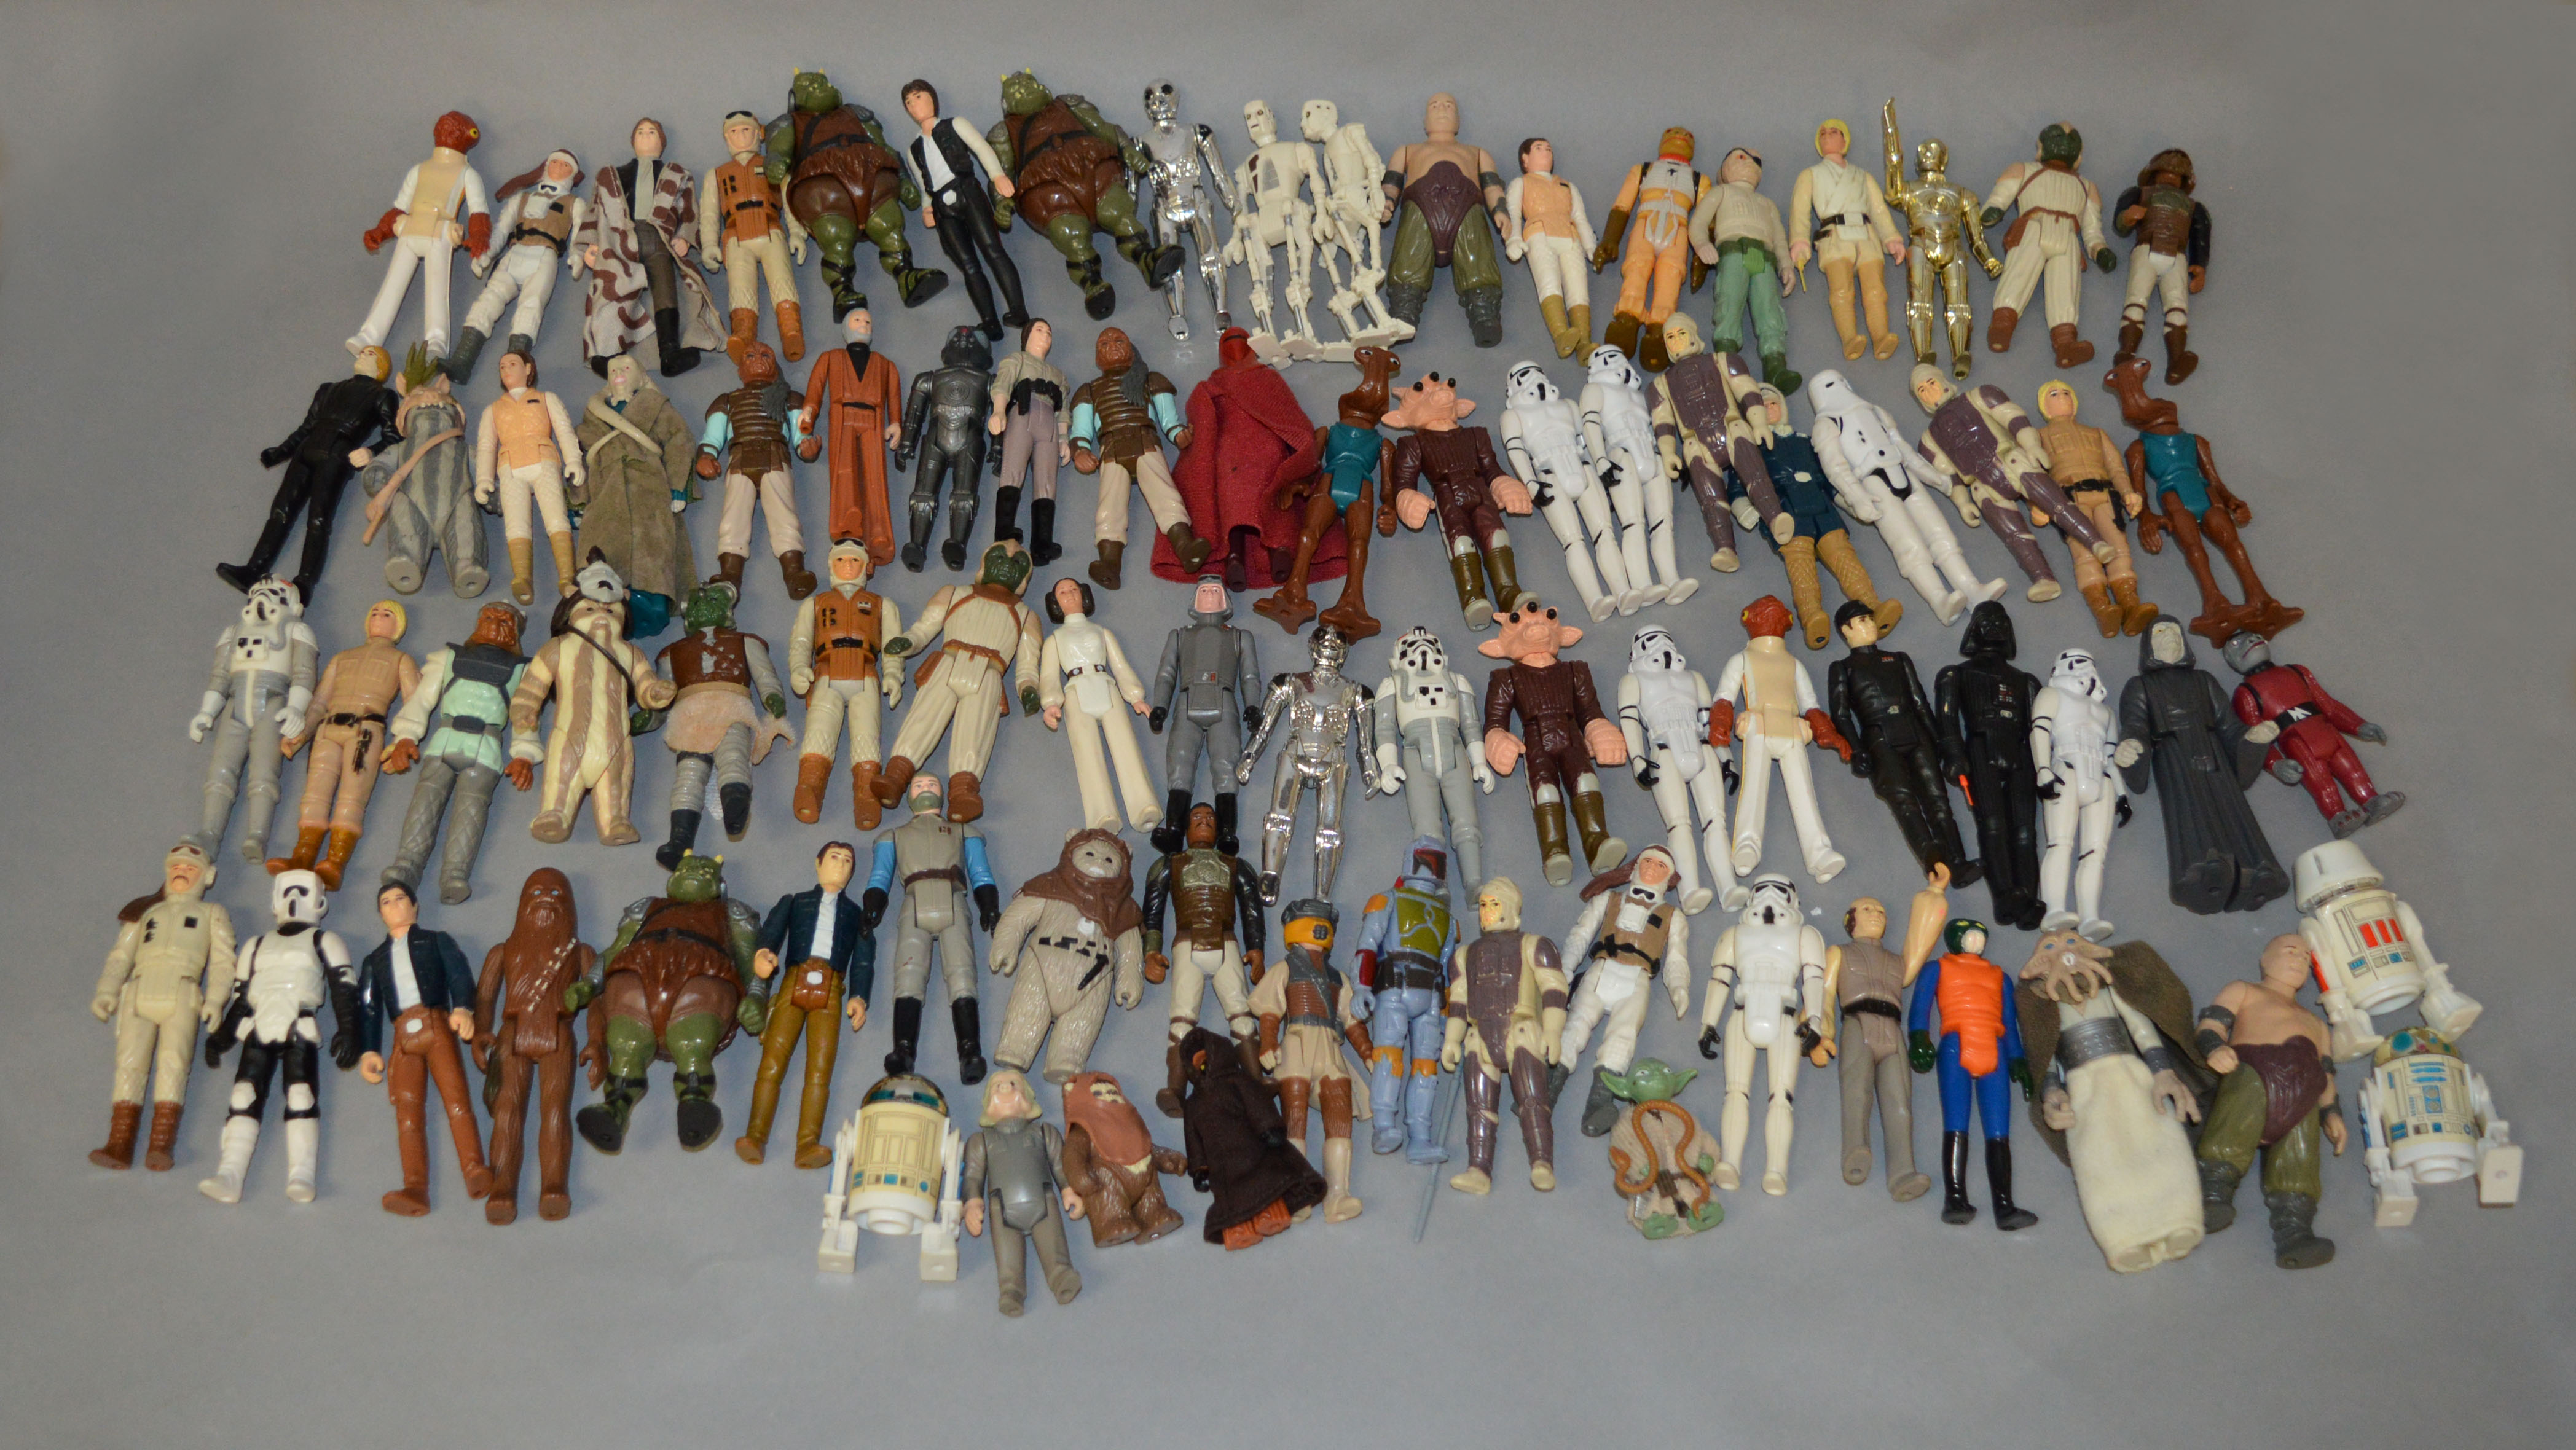 82 x Kenner Star Wars 3 3/4" action figures. Many are in VG condition, but mostly missing weapons.